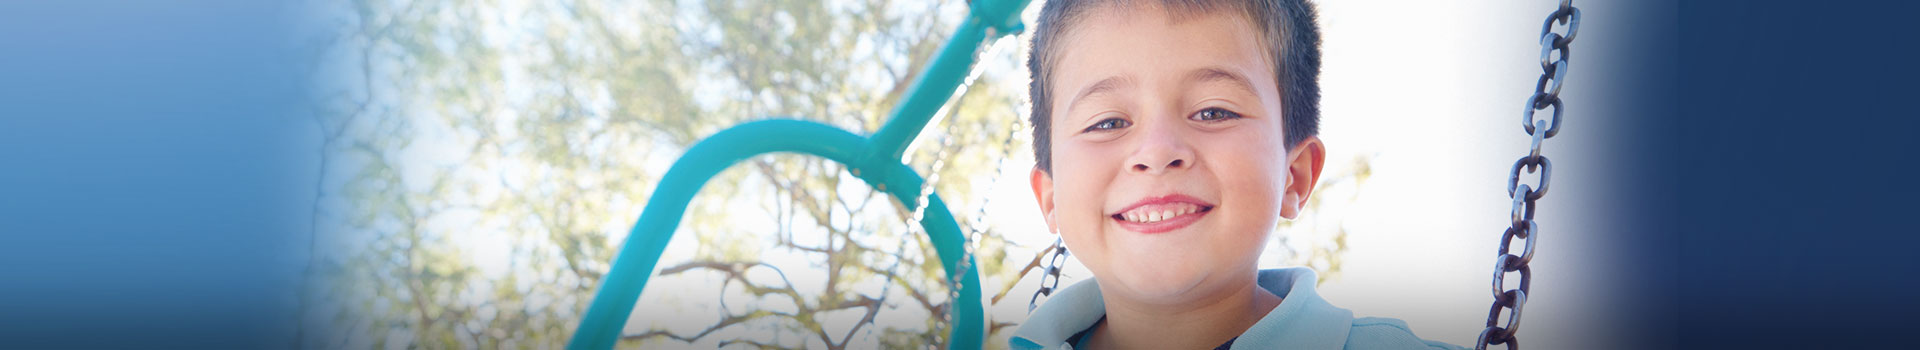 Young boy smiling on swing at playground